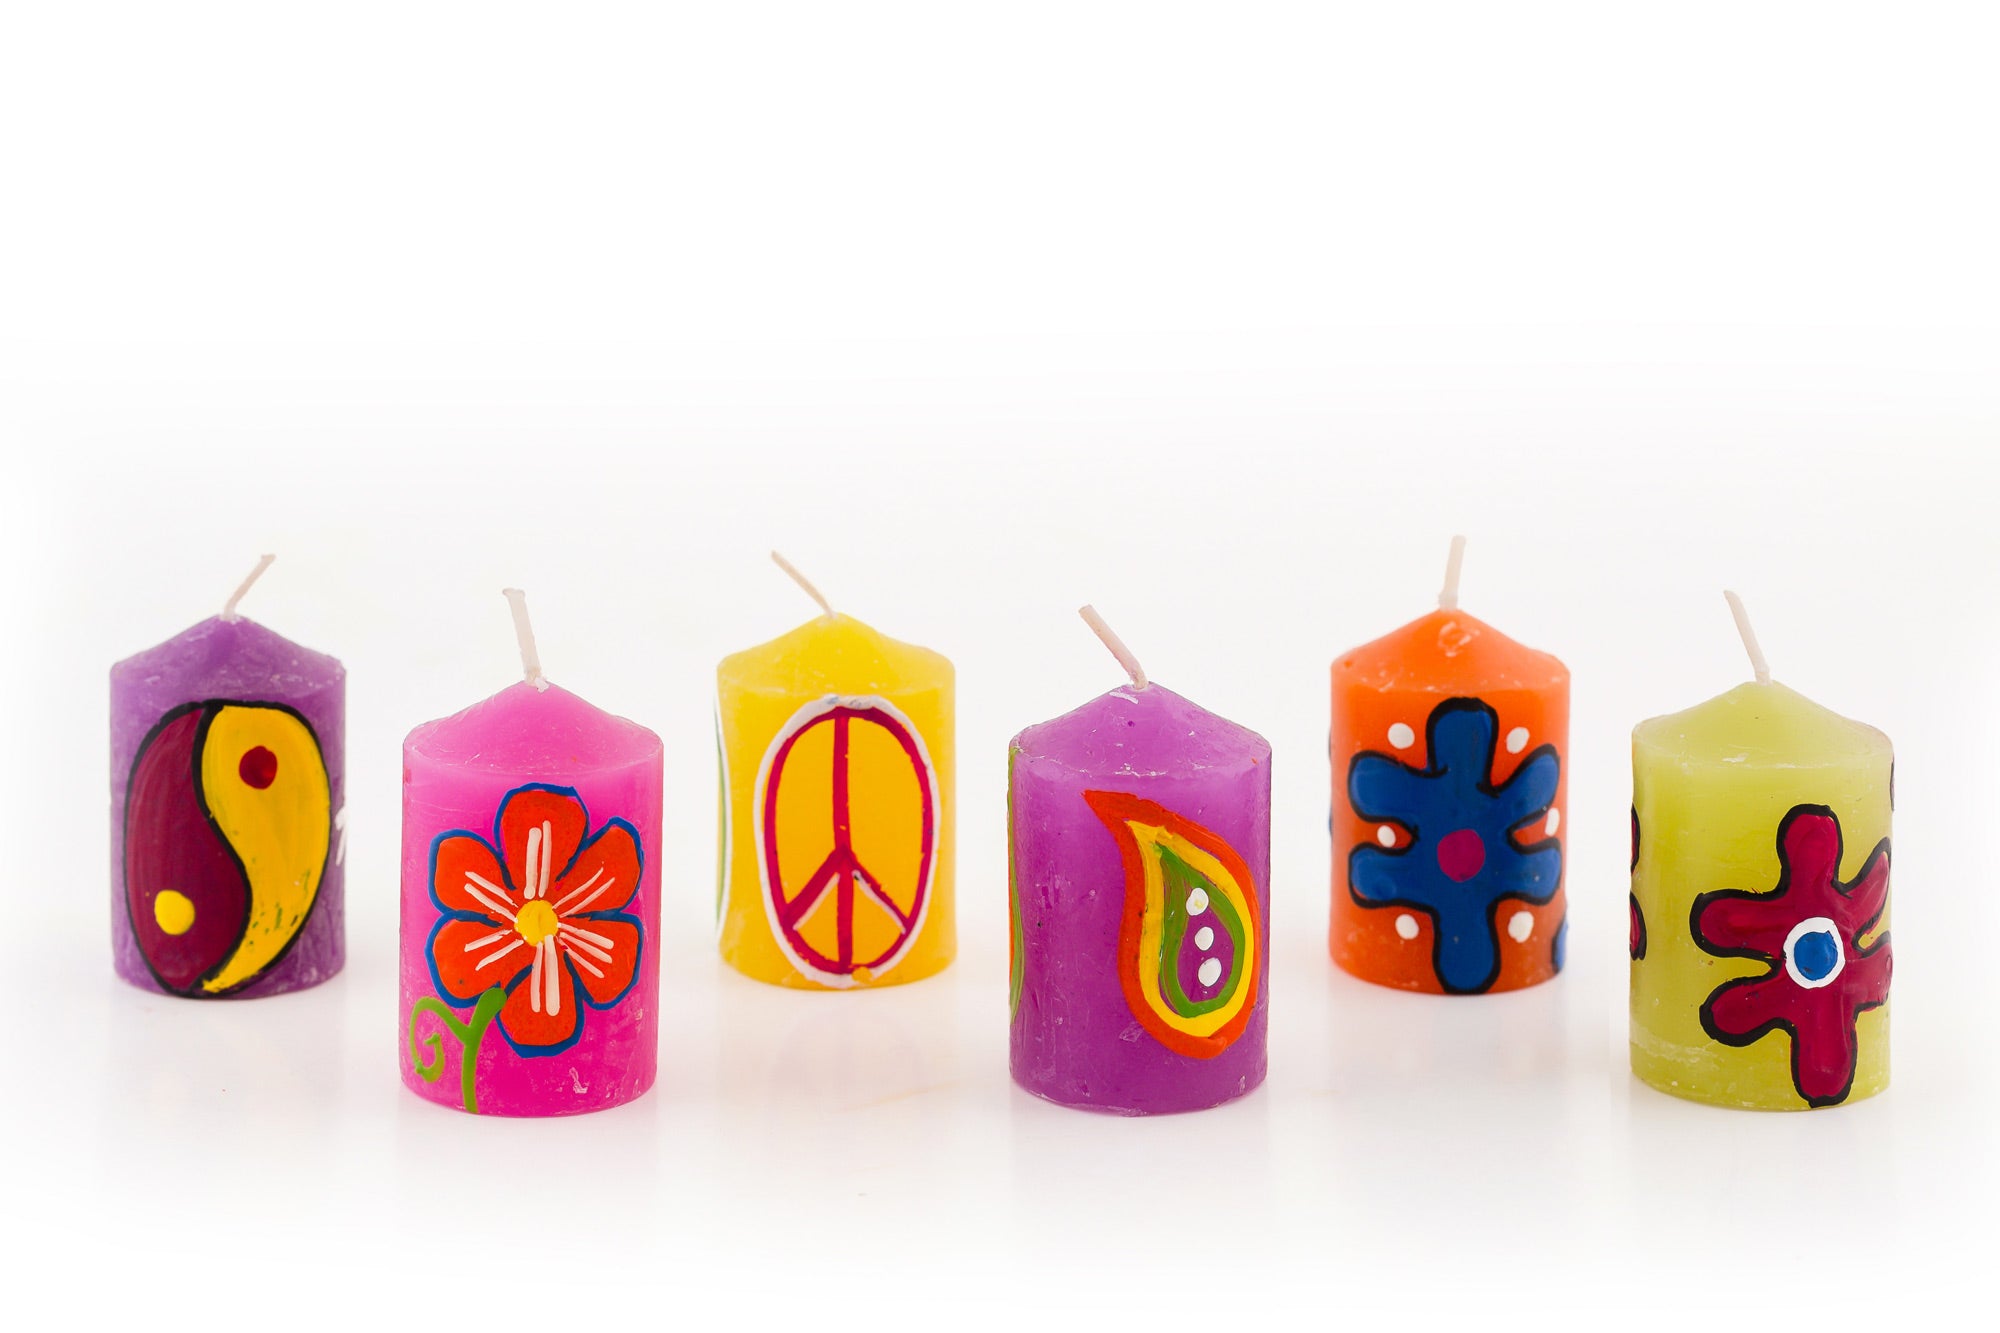 Selection of 6 votives; purple candle with ying-yang design, bright pink candle with orange flower, yellow candle with peace sign, purple candle with paisley, orange candle with blue 'hippie' flower, green candle with red 'pop art' flower.